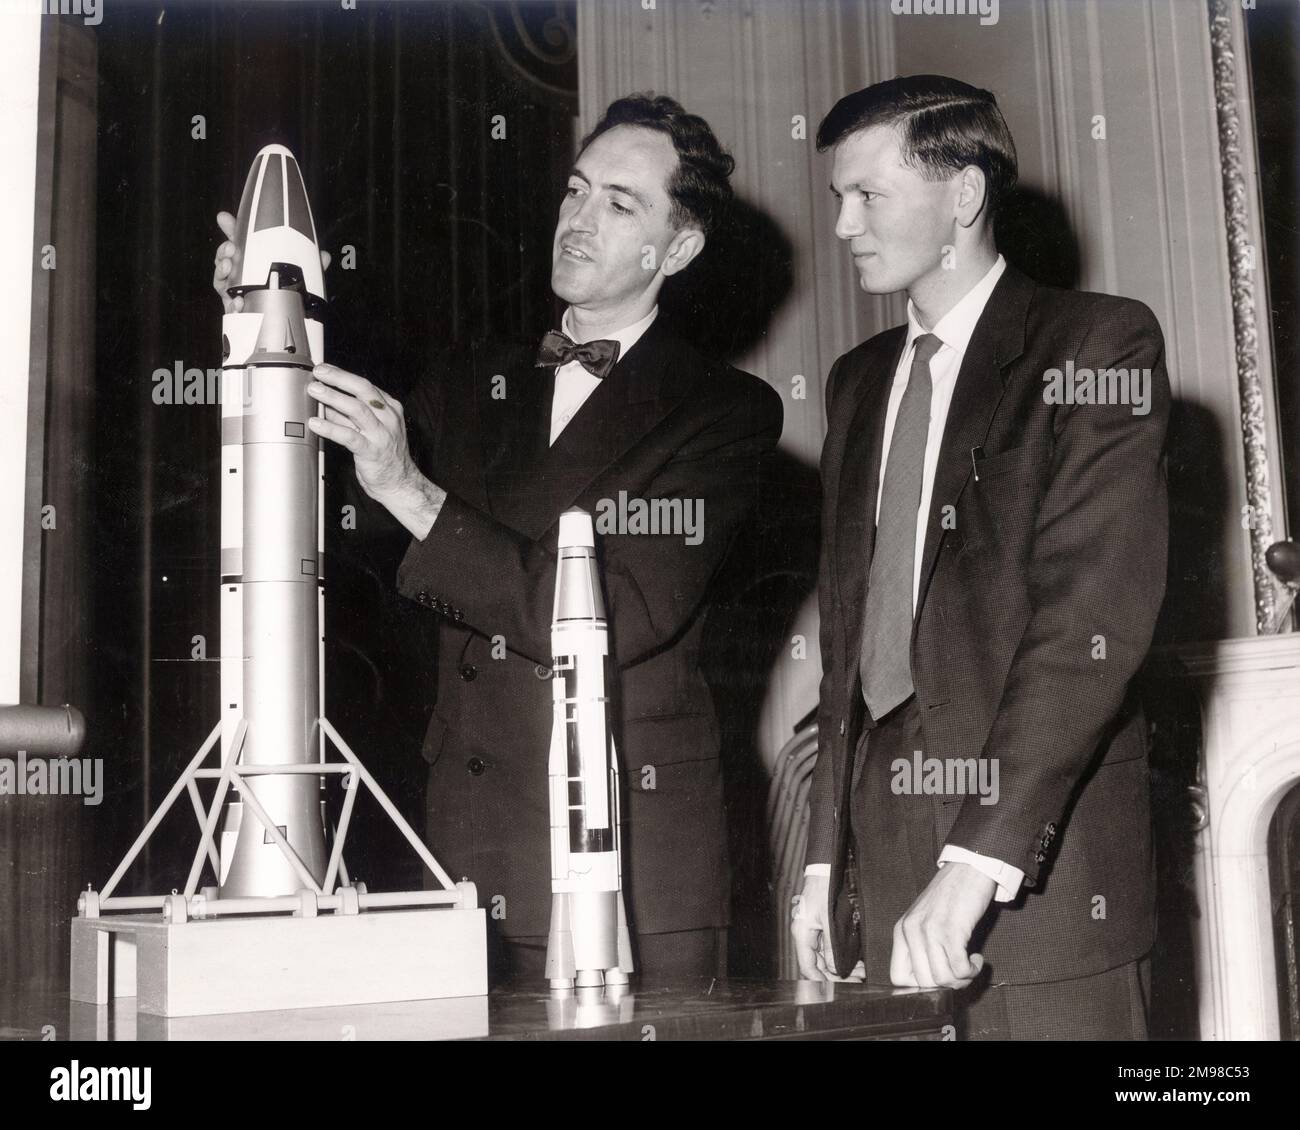 John Allen, left, of the Avro Weapons Research Division, discussed the extreme launch accuracies needed for lunar probes at a lecture to the Graduates and Students Section of the Royal Aeronautical Society at No.4 Hamilton Place on 7 October 1959. Stock Photo